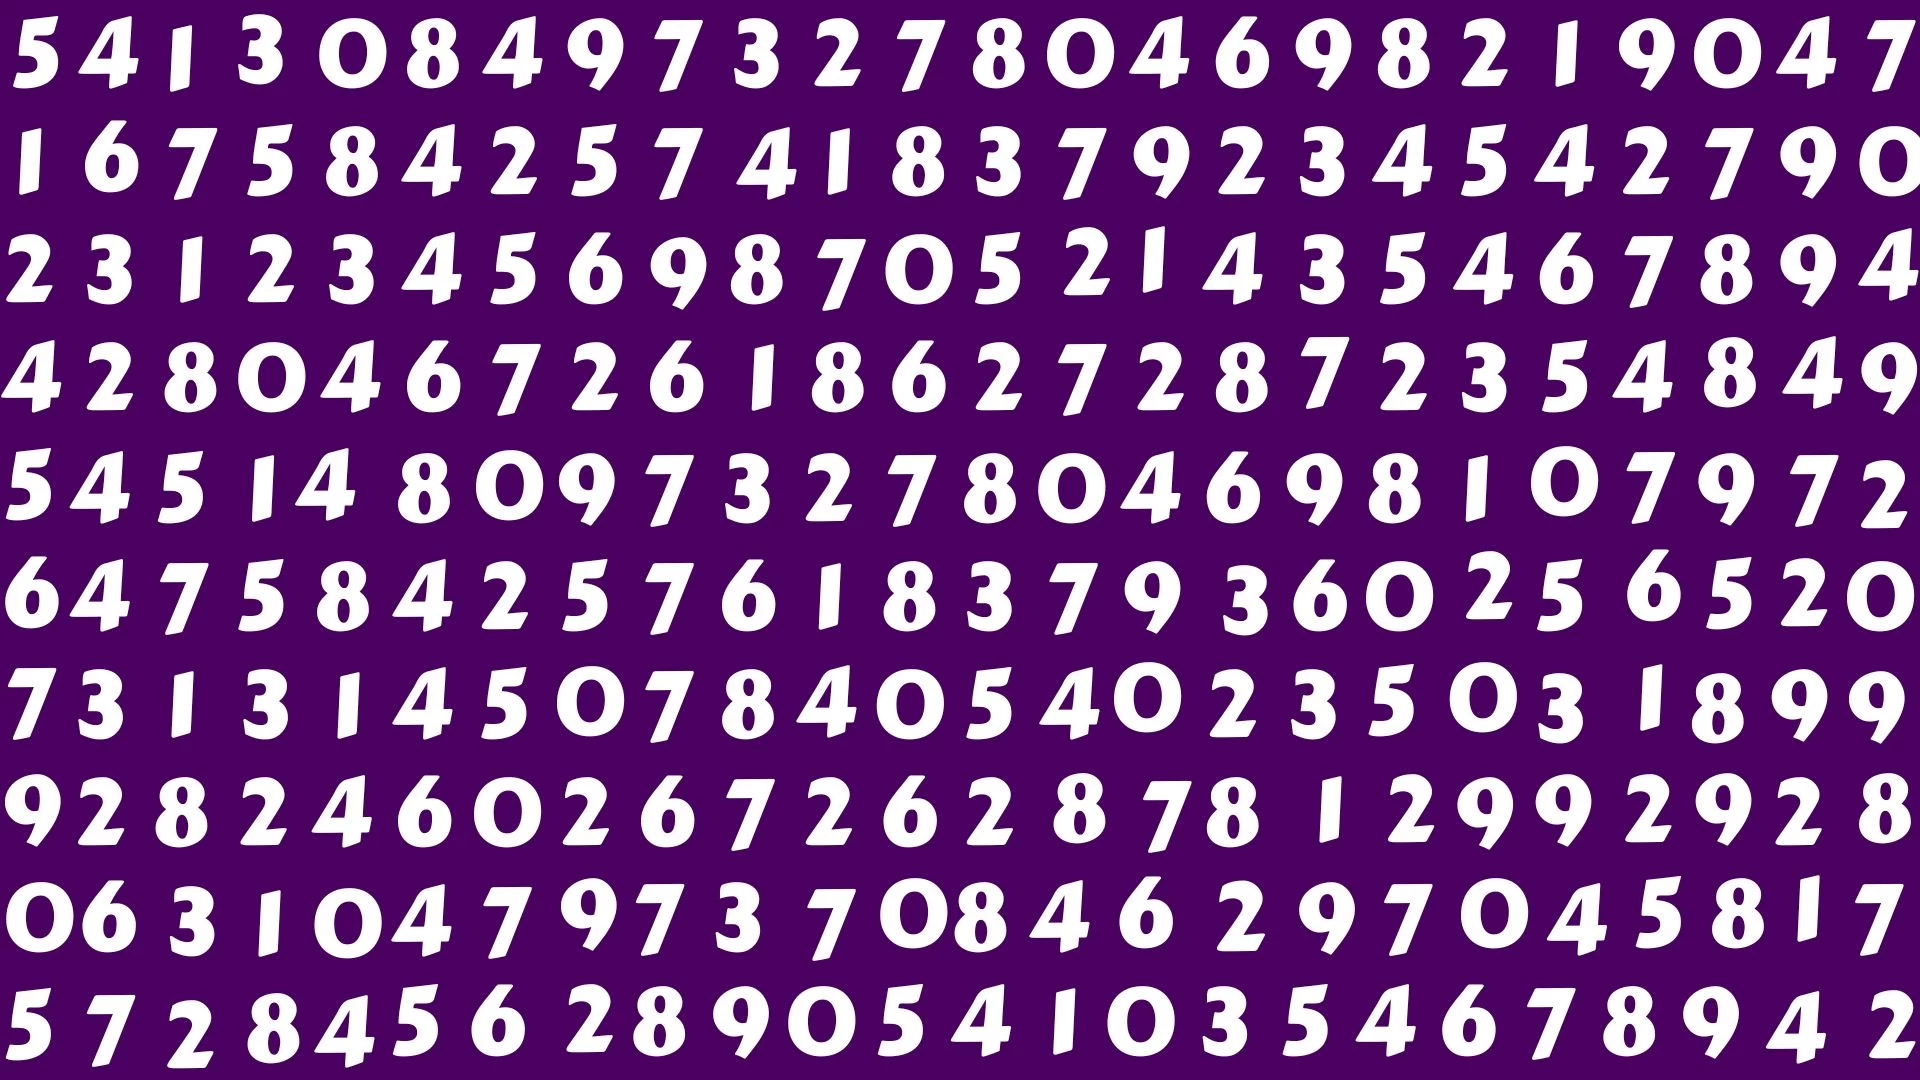 Only Detective Brains can Spot the Number 8477 in 10 Secs